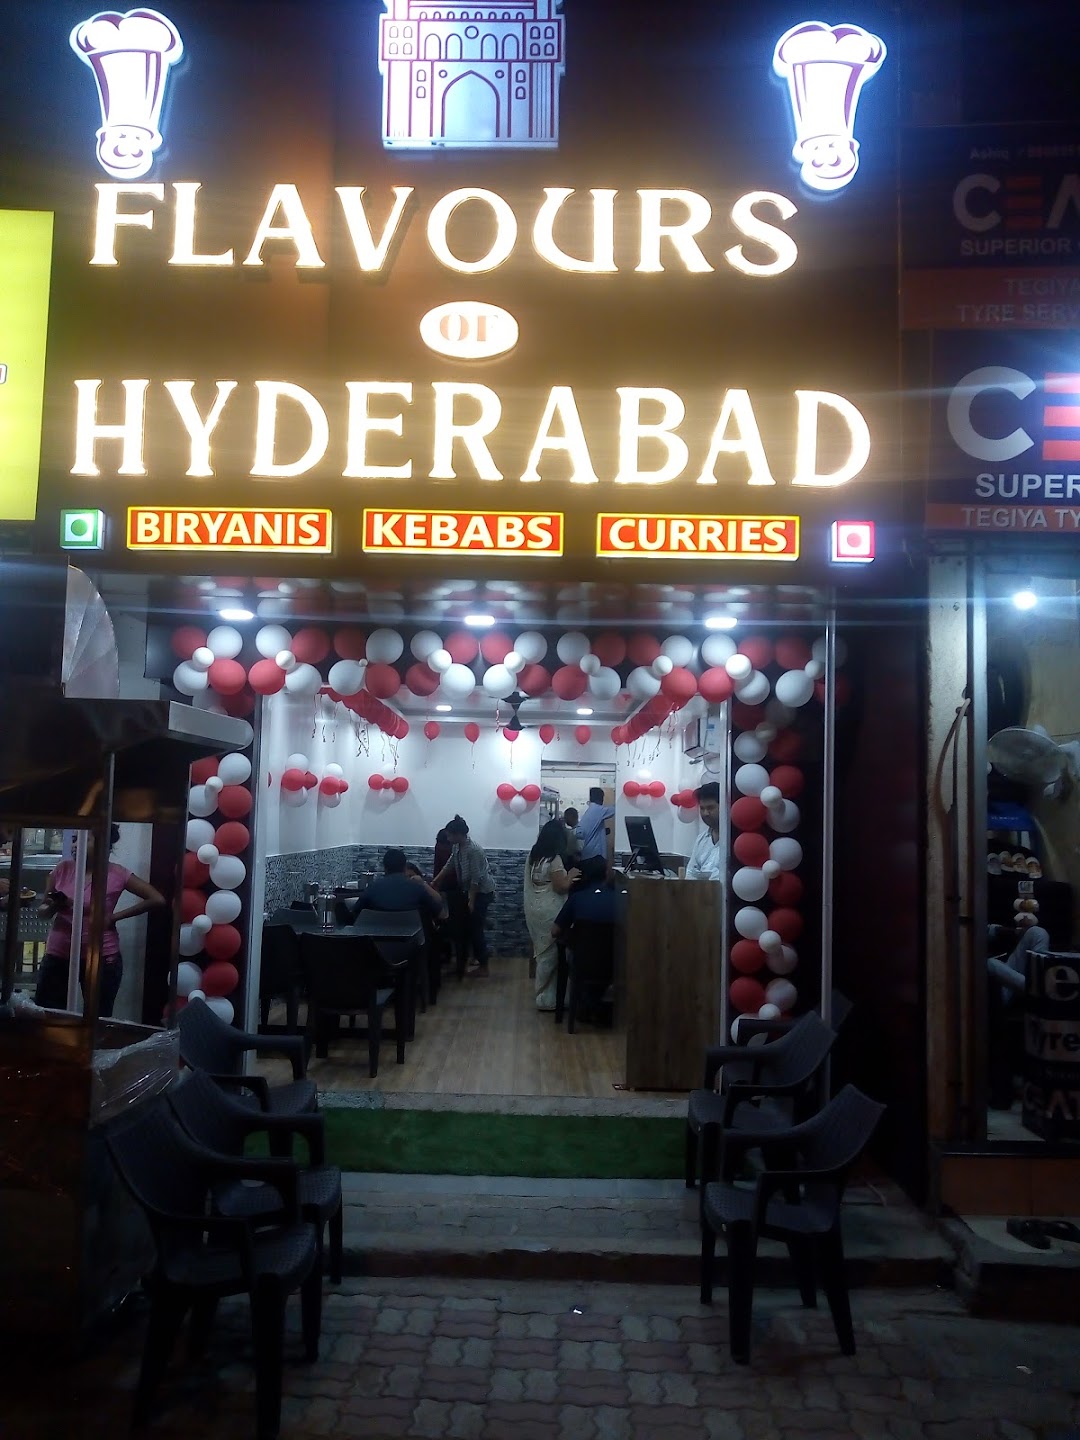 Flavours of Hyderabad